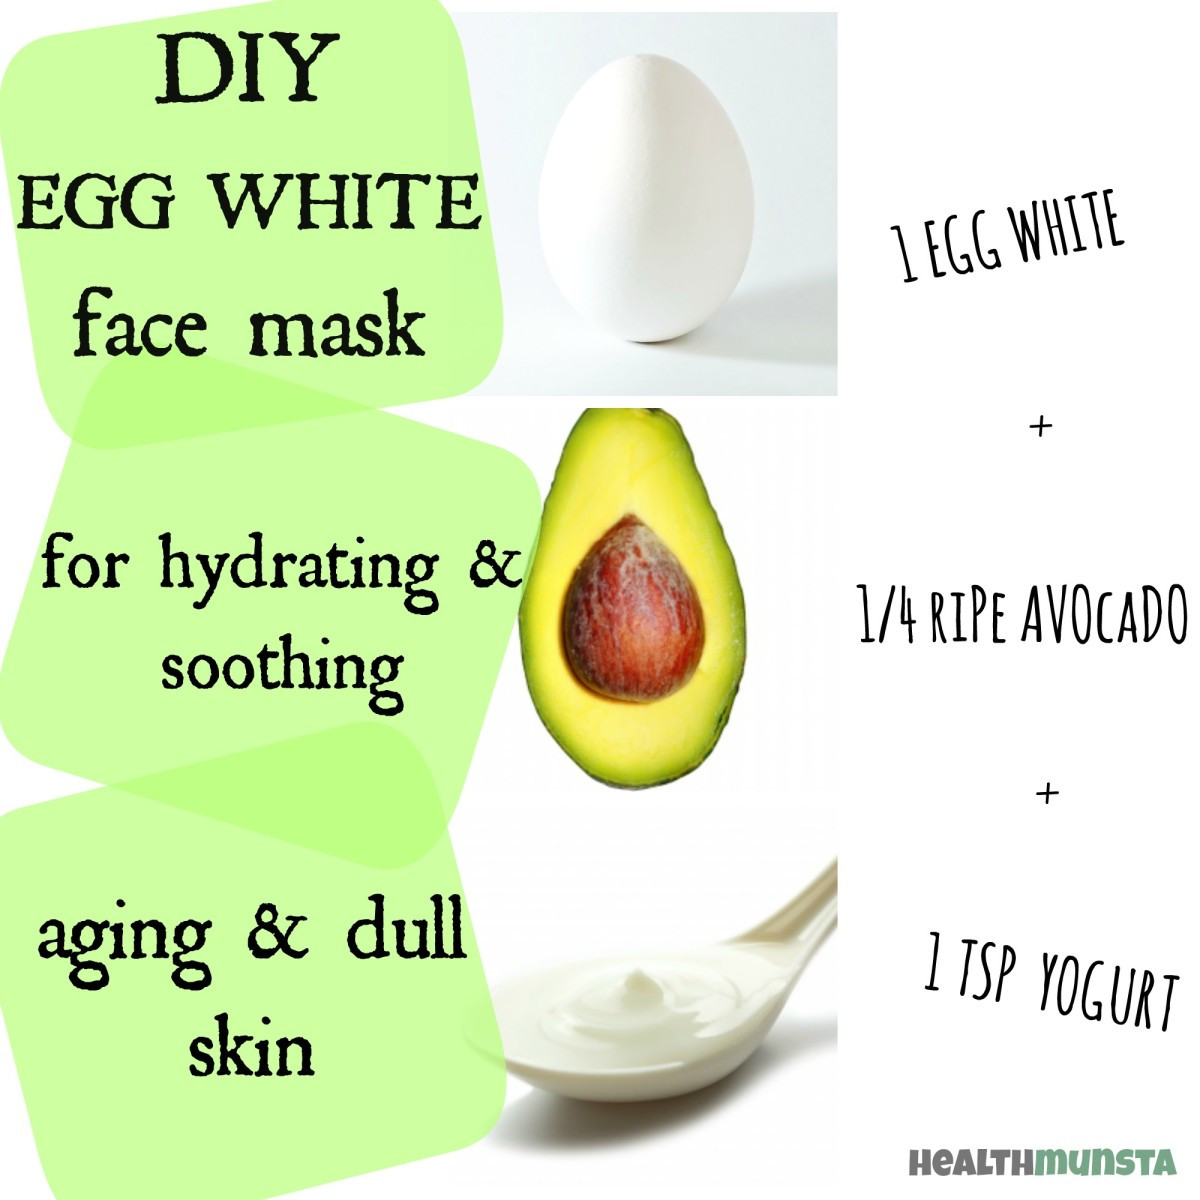 DIY Peel Off Face Mask With Egg
 DIY Egg White Face Mask Recipes for Beautiful Skin